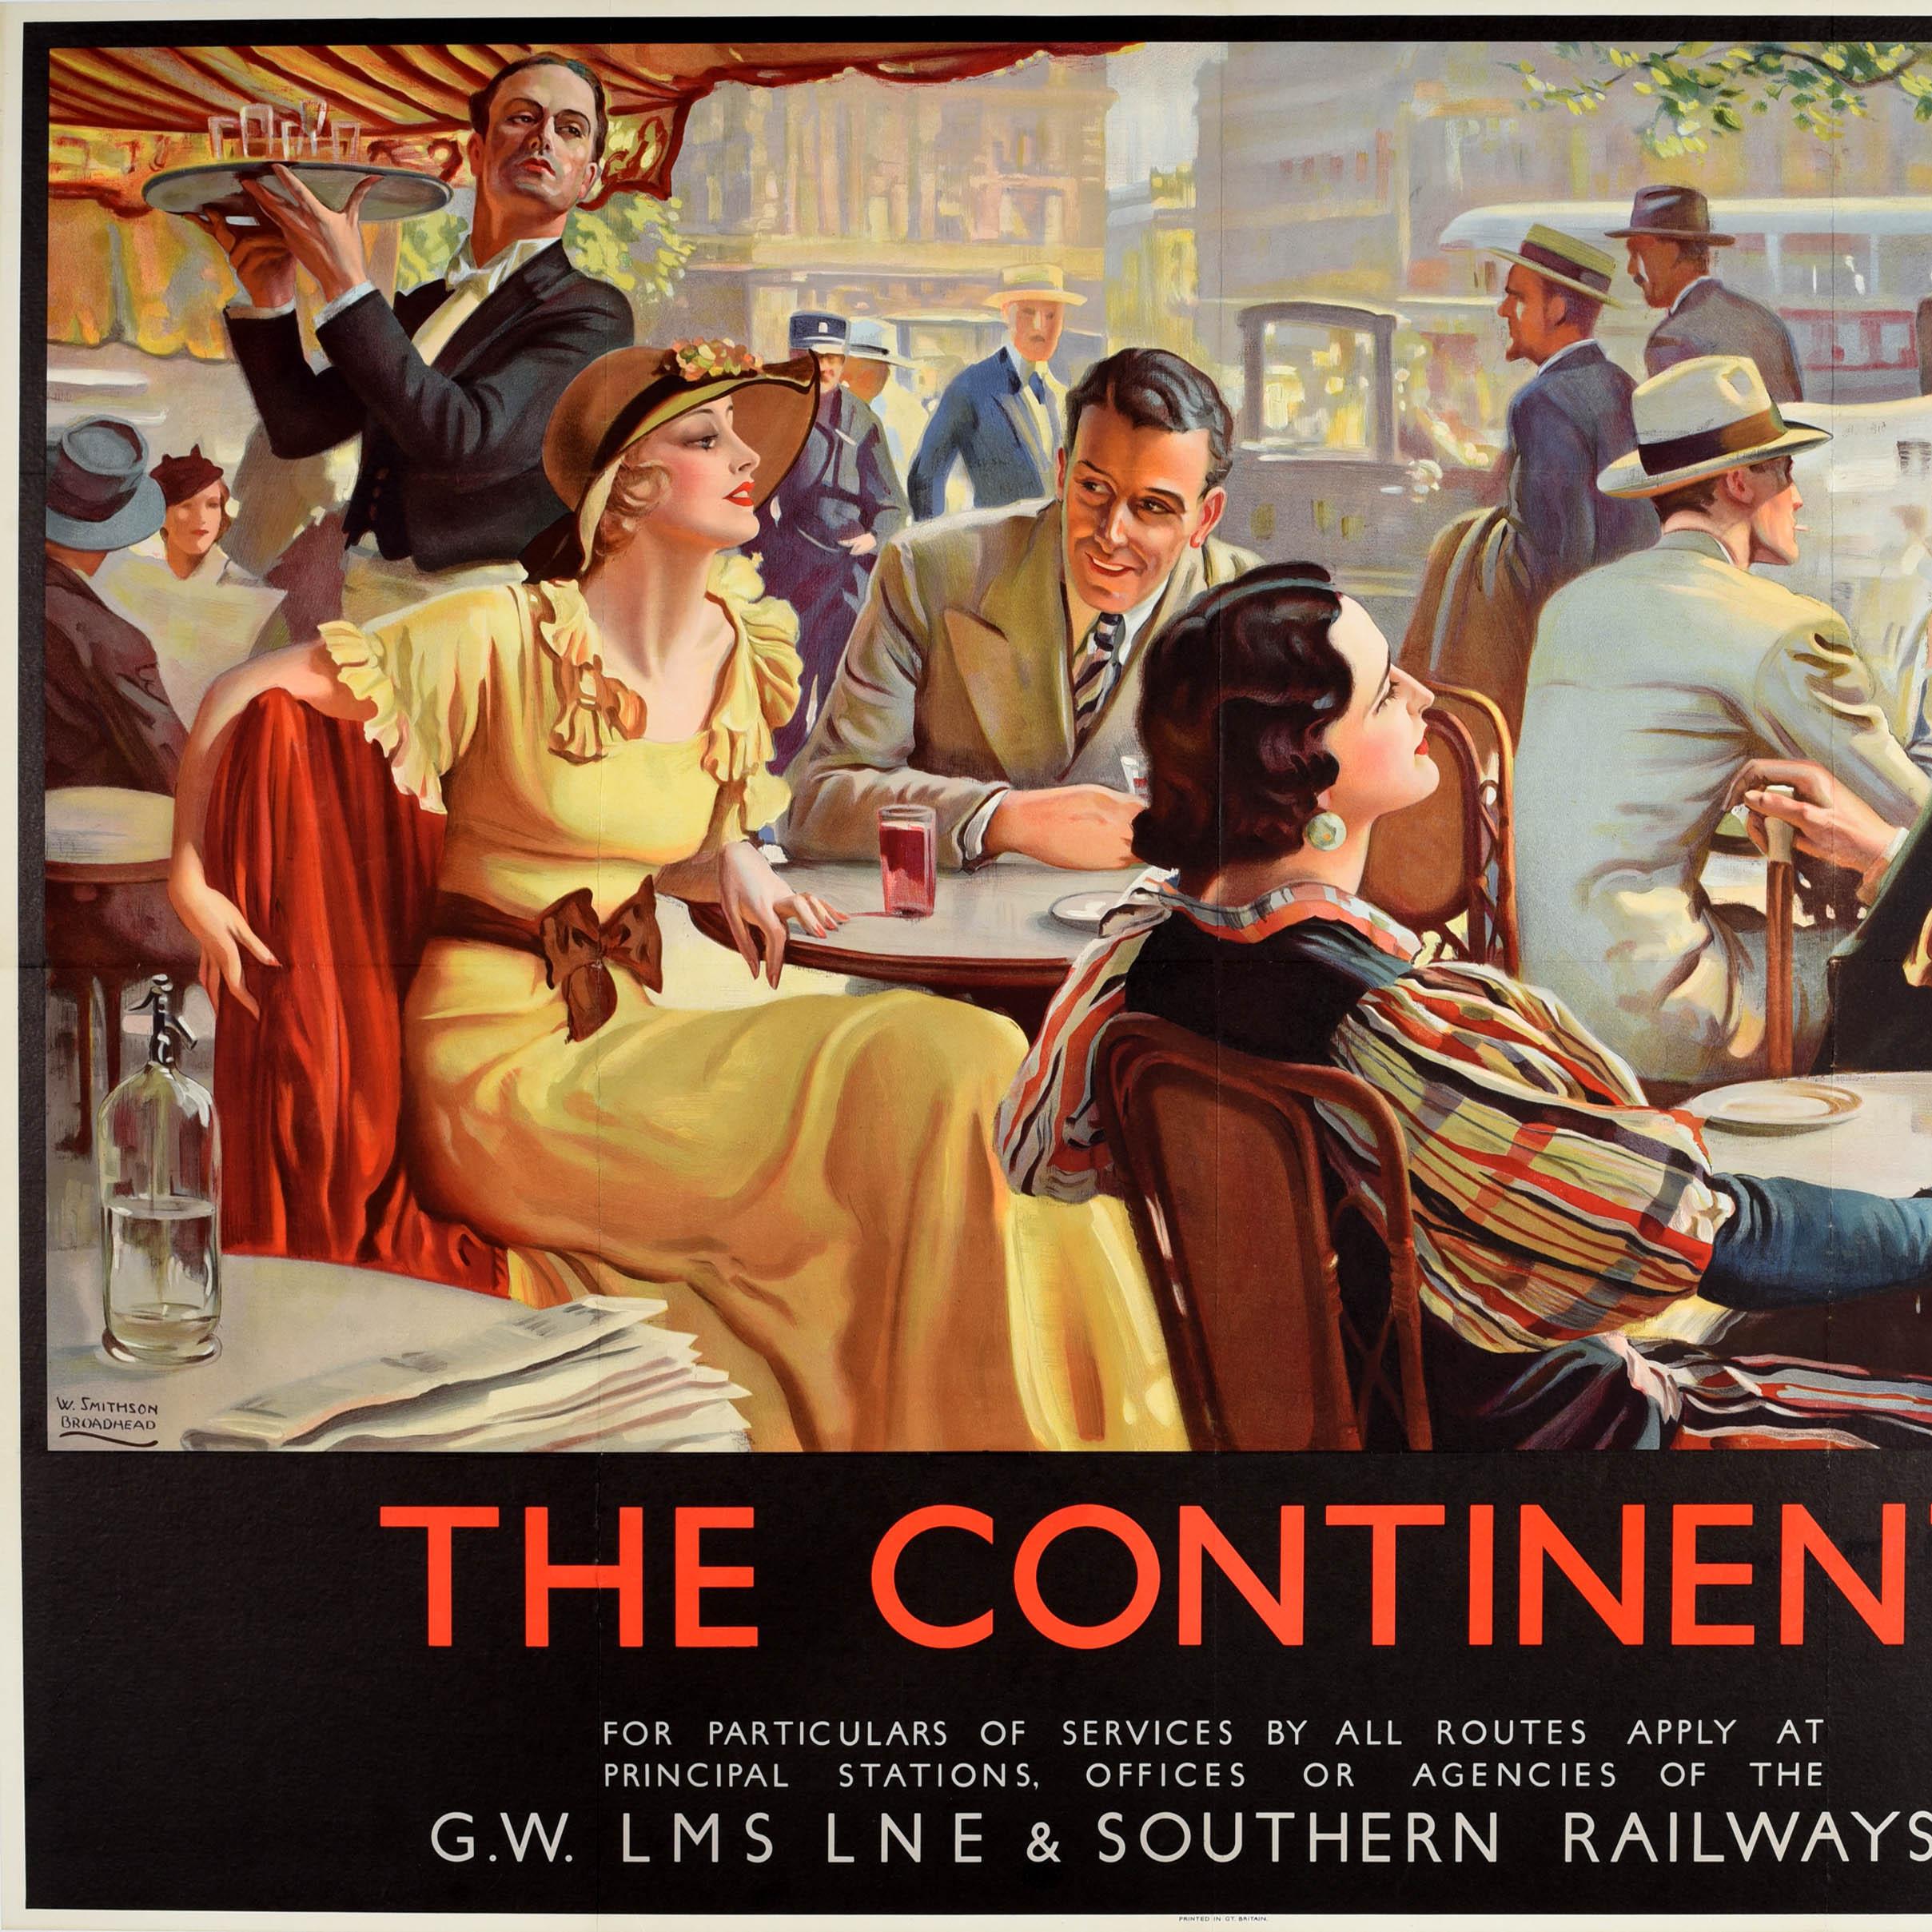 Original Vintage Travel Poster The Continent LMS Southern Railways Art Deco GWR - Brown Print by W. Smithson Broadhead